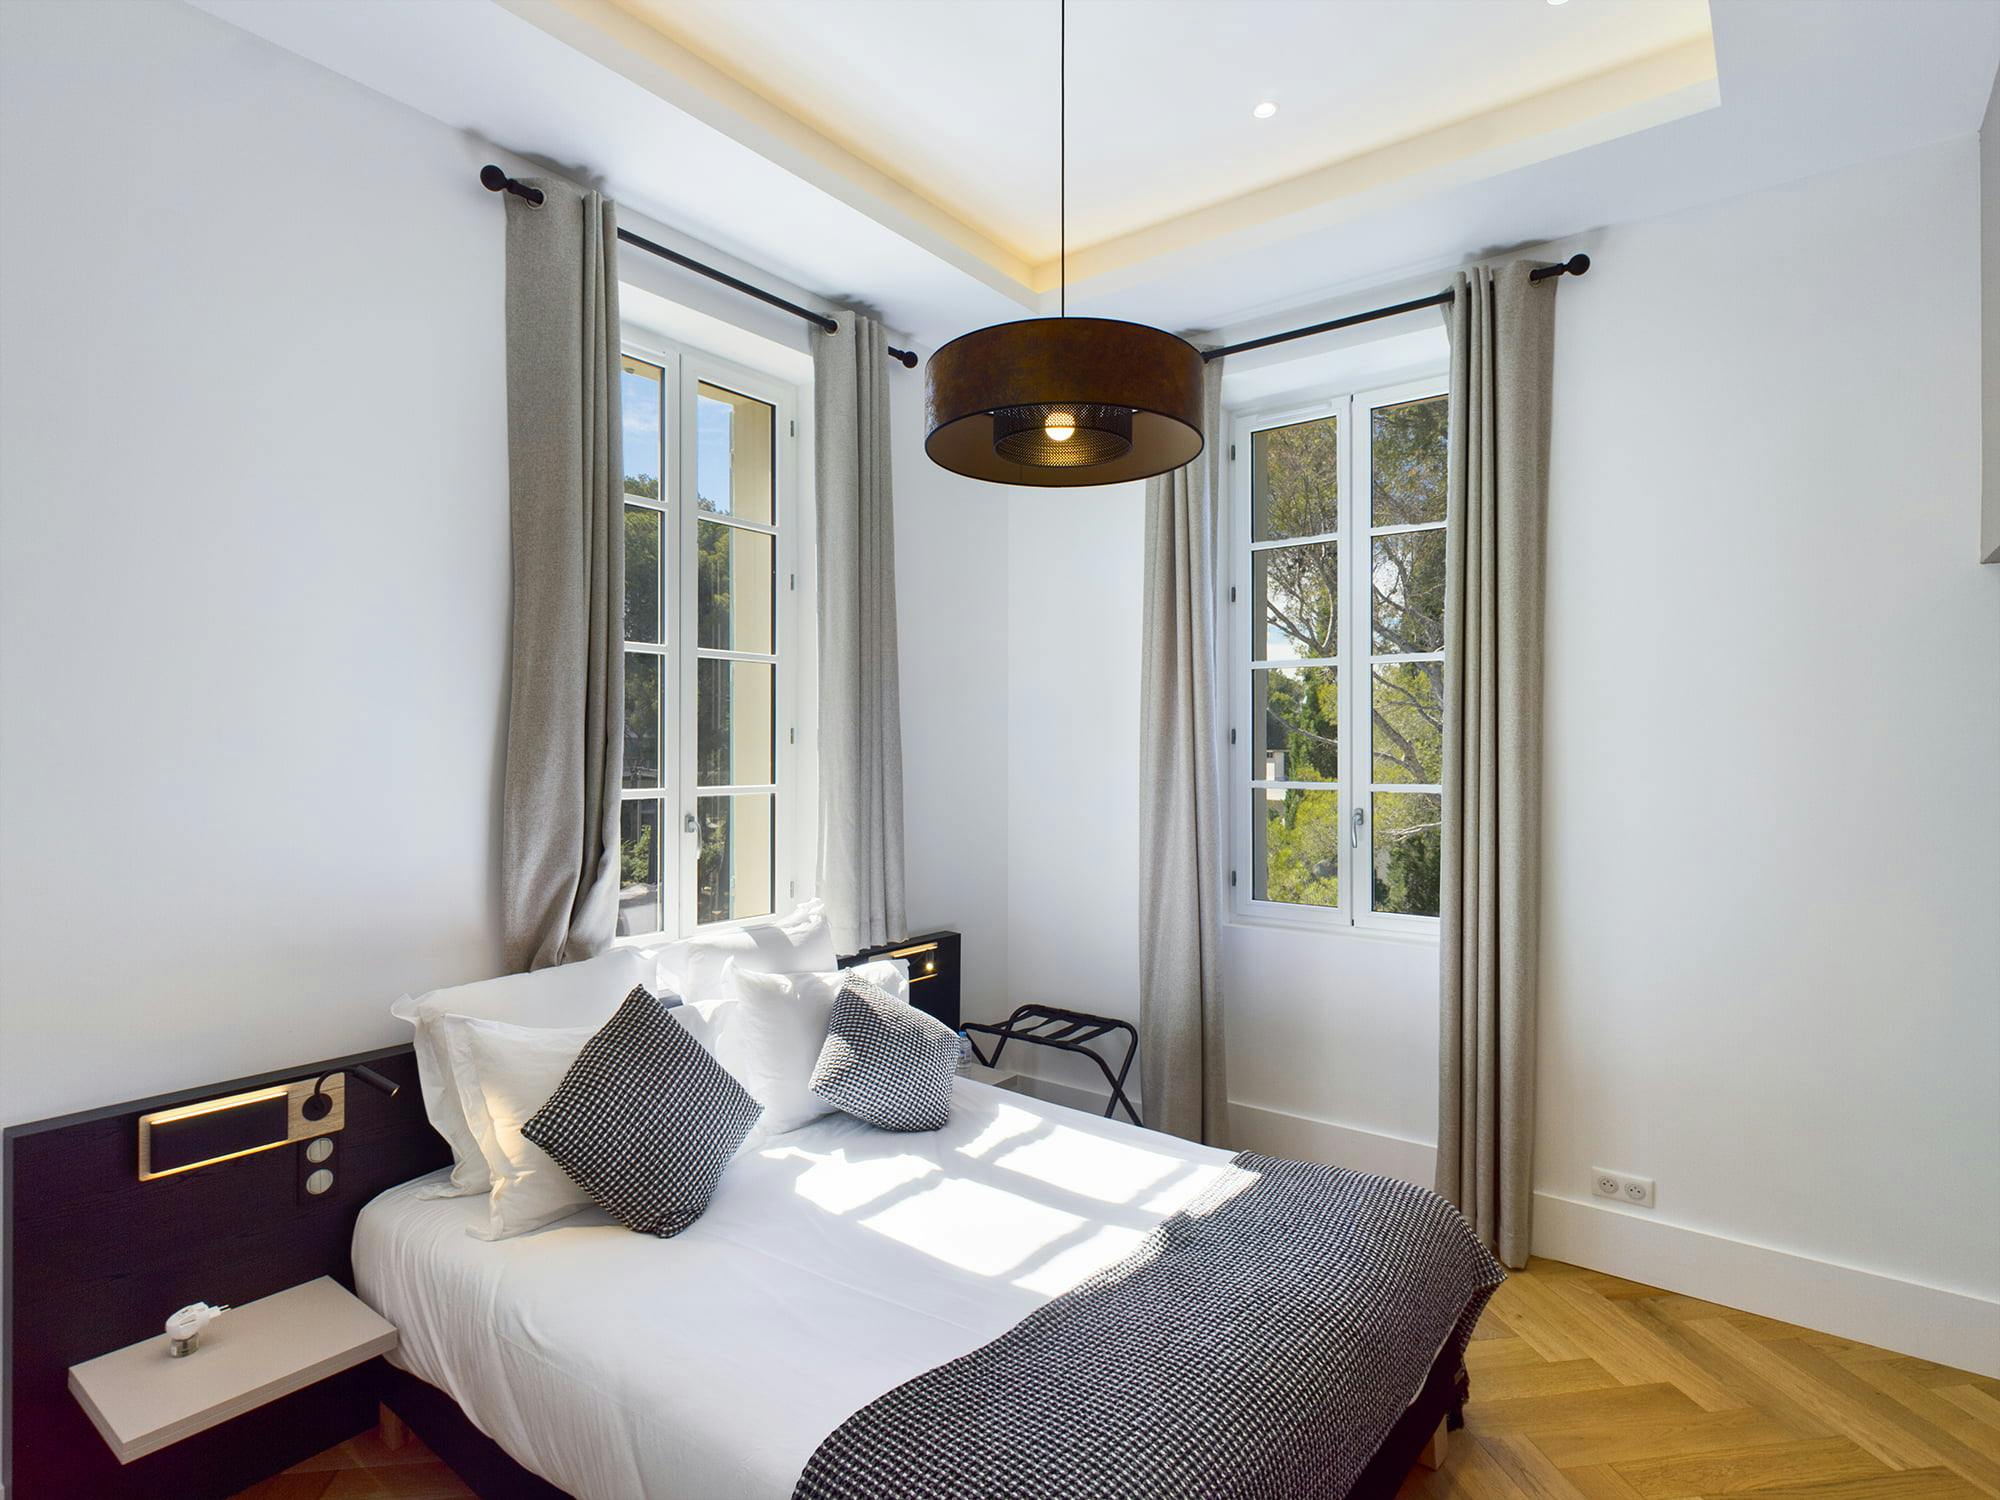 Sunny bedroom, hanging lamp and view of the château garden